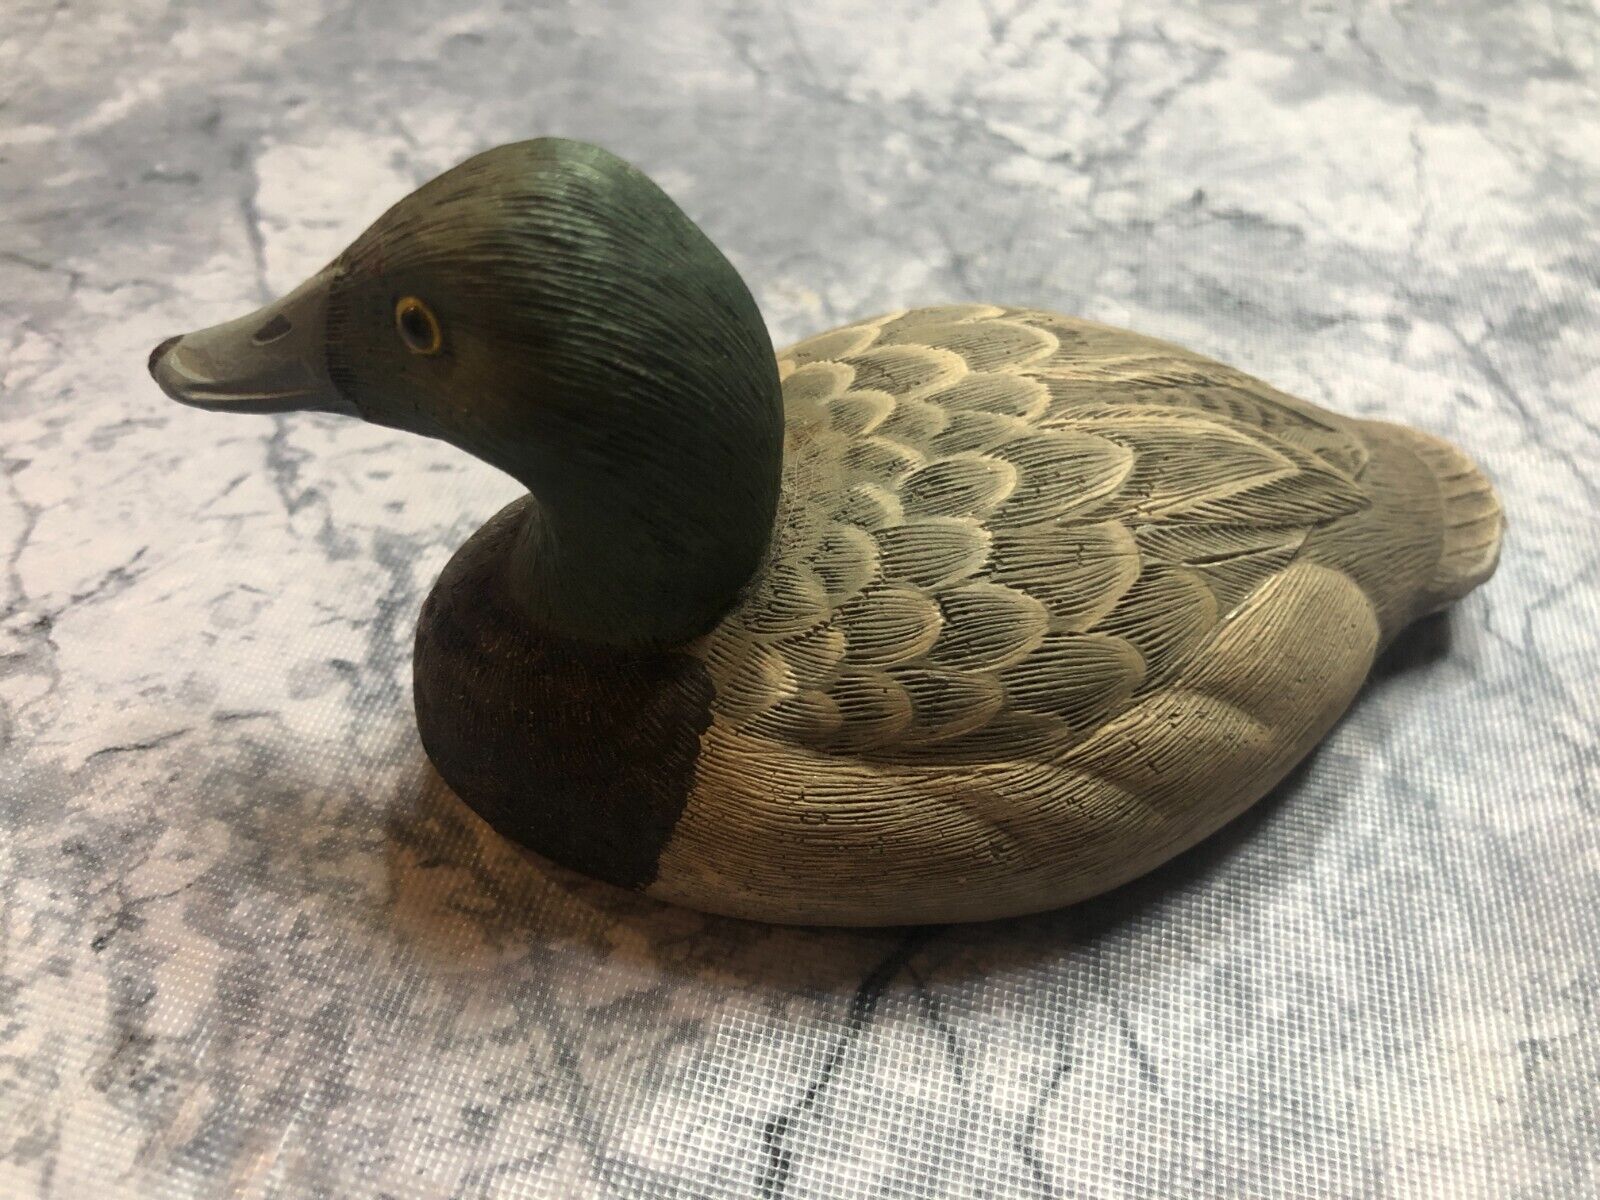 Scaup Duck Decoy signed by Ann and Jim Burkett, Jacksonville, FL - 5 inches